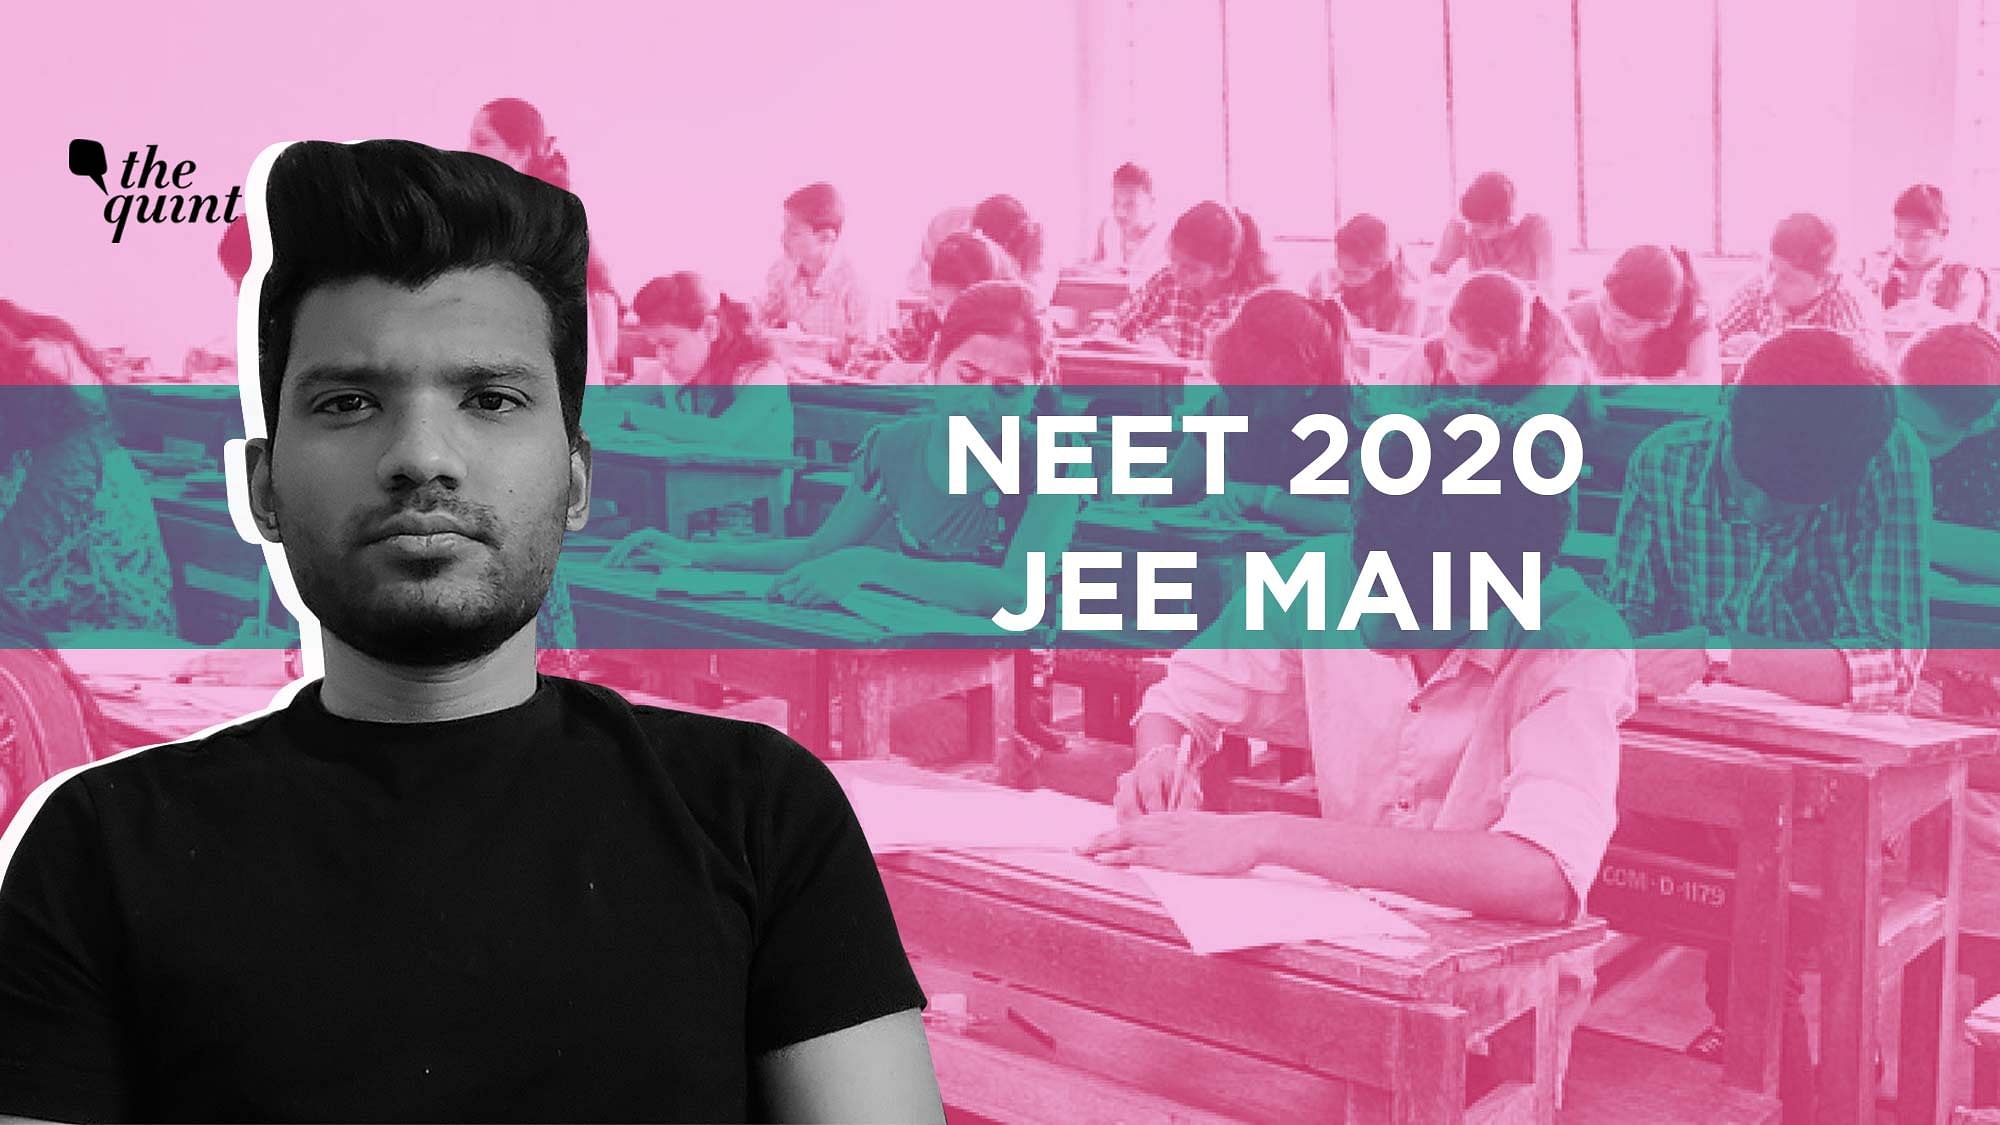 From JEE Main to NEET (UG) 2020, here’s what we know about dates for competitive exams.